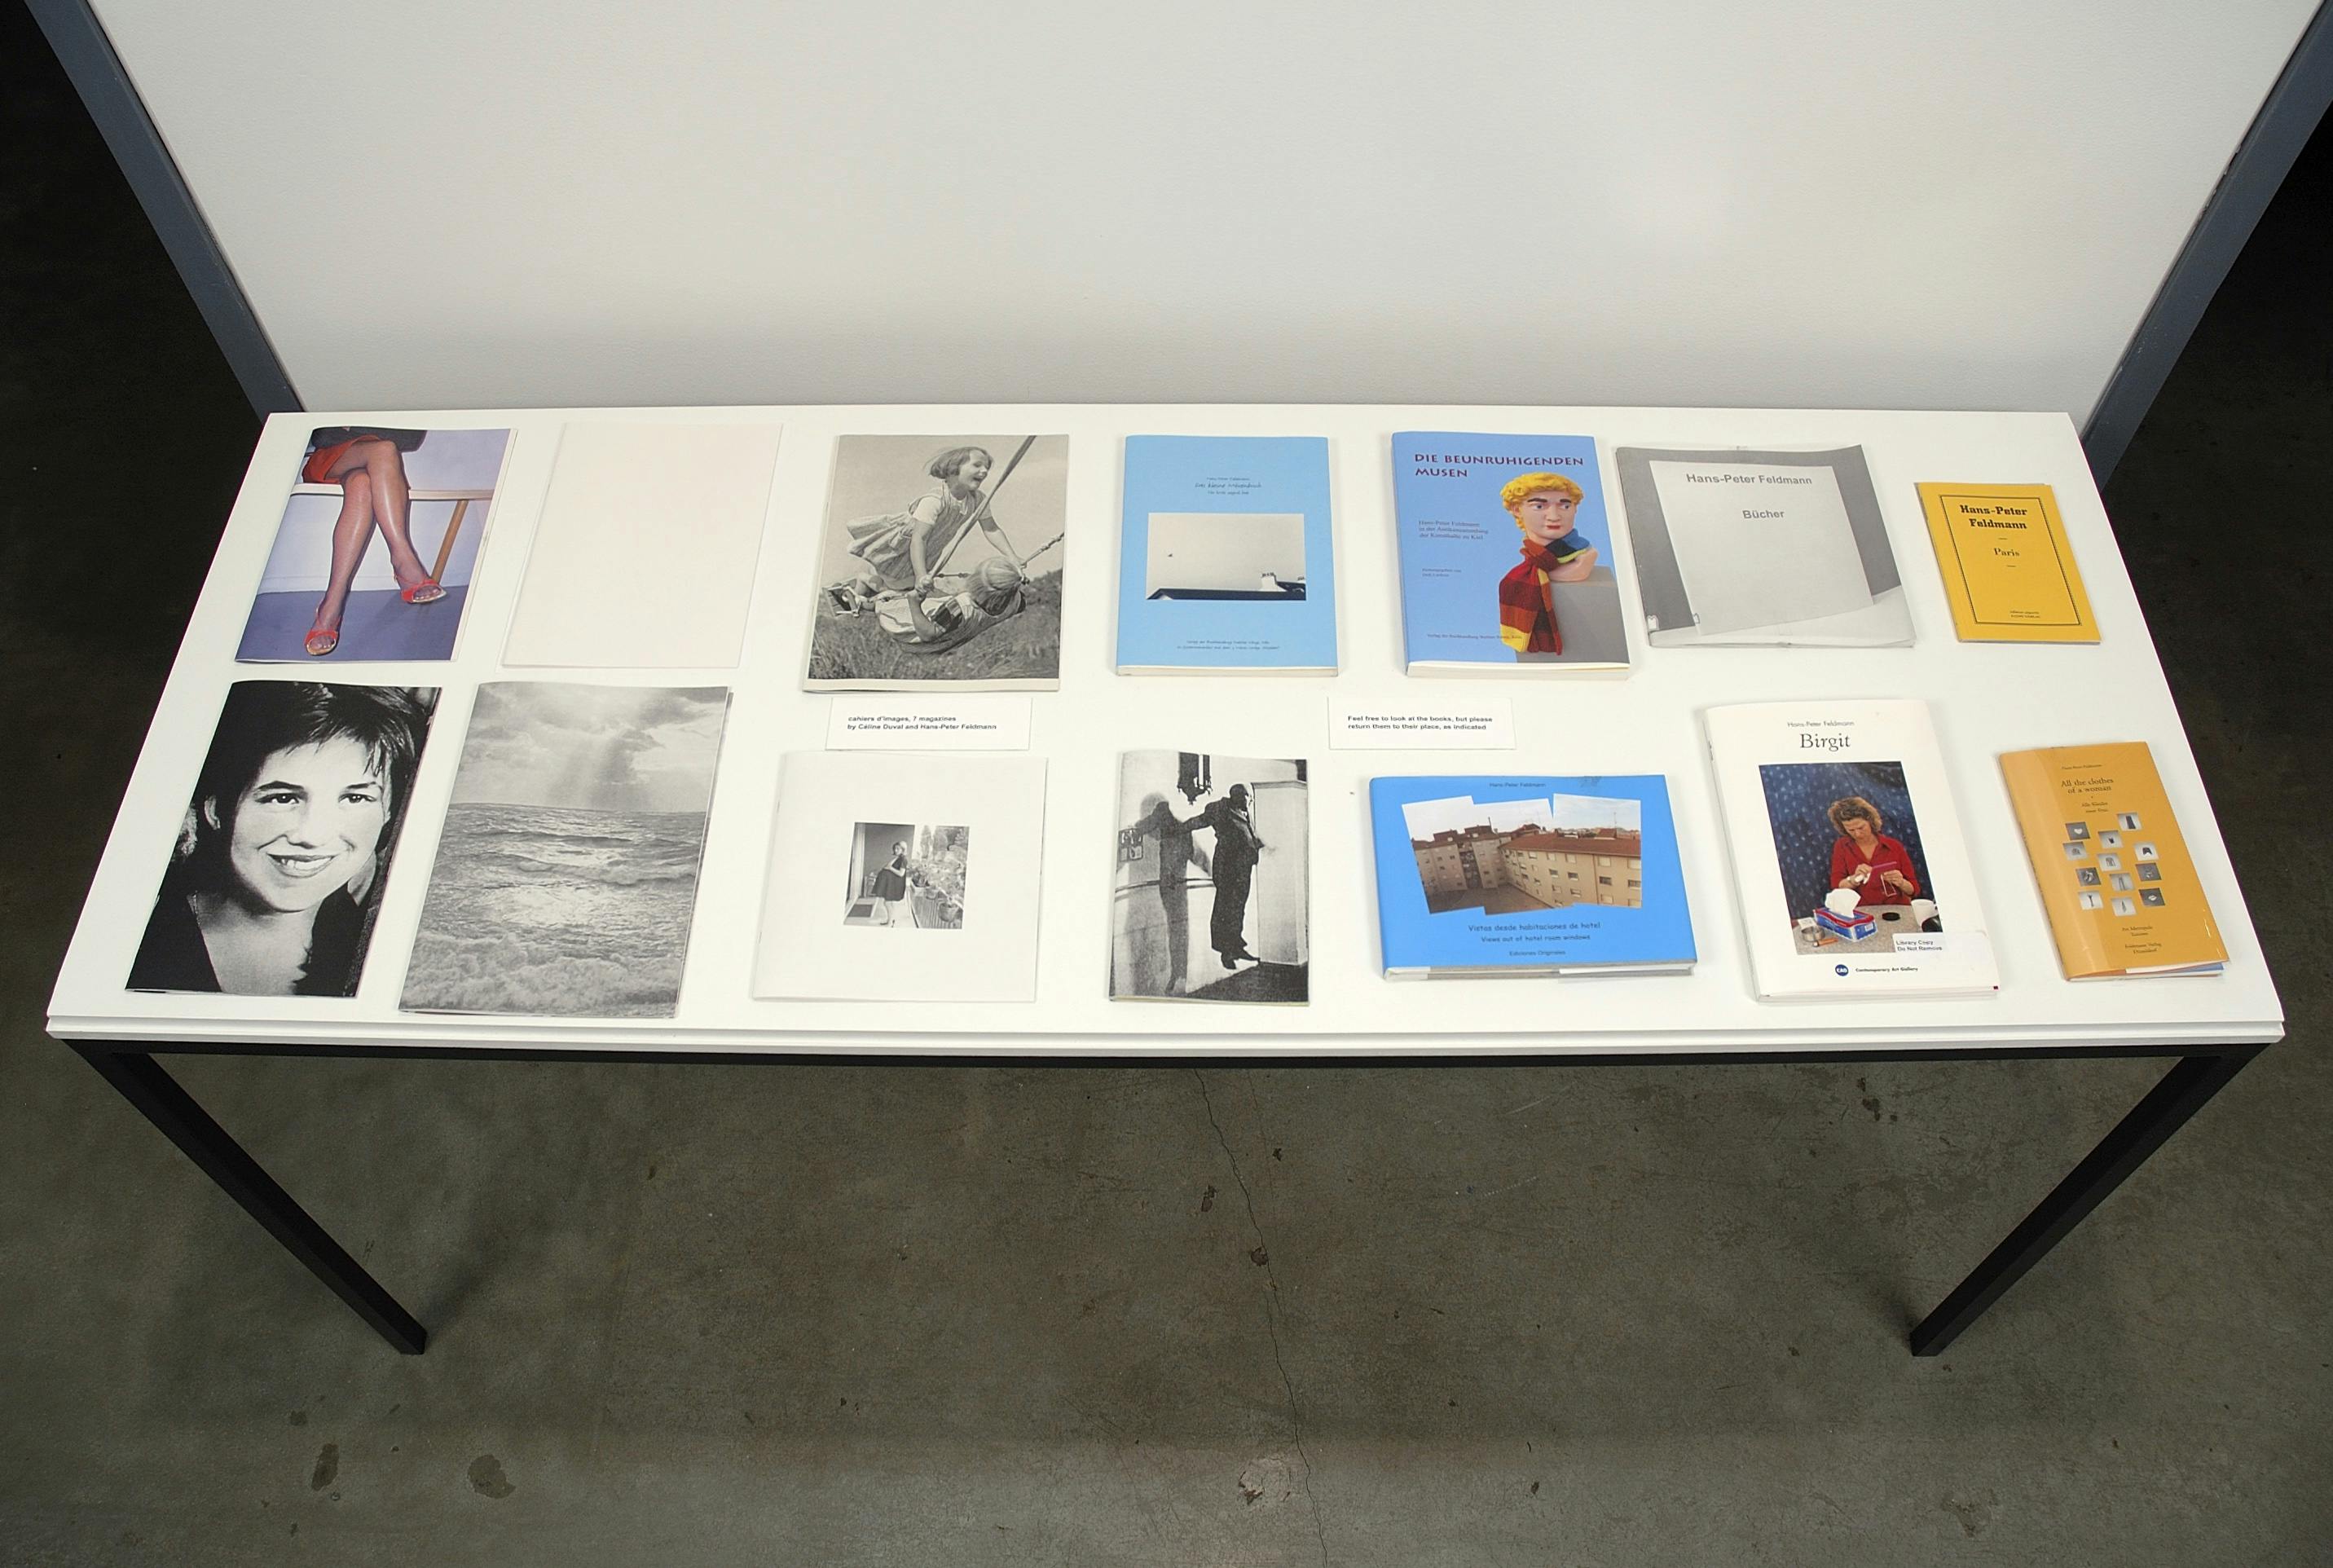 Several books displayed on a white table. The photos on the covers include two children laughing on a swing, legs of a person wearing heels and tights, and a person levitating in a room.